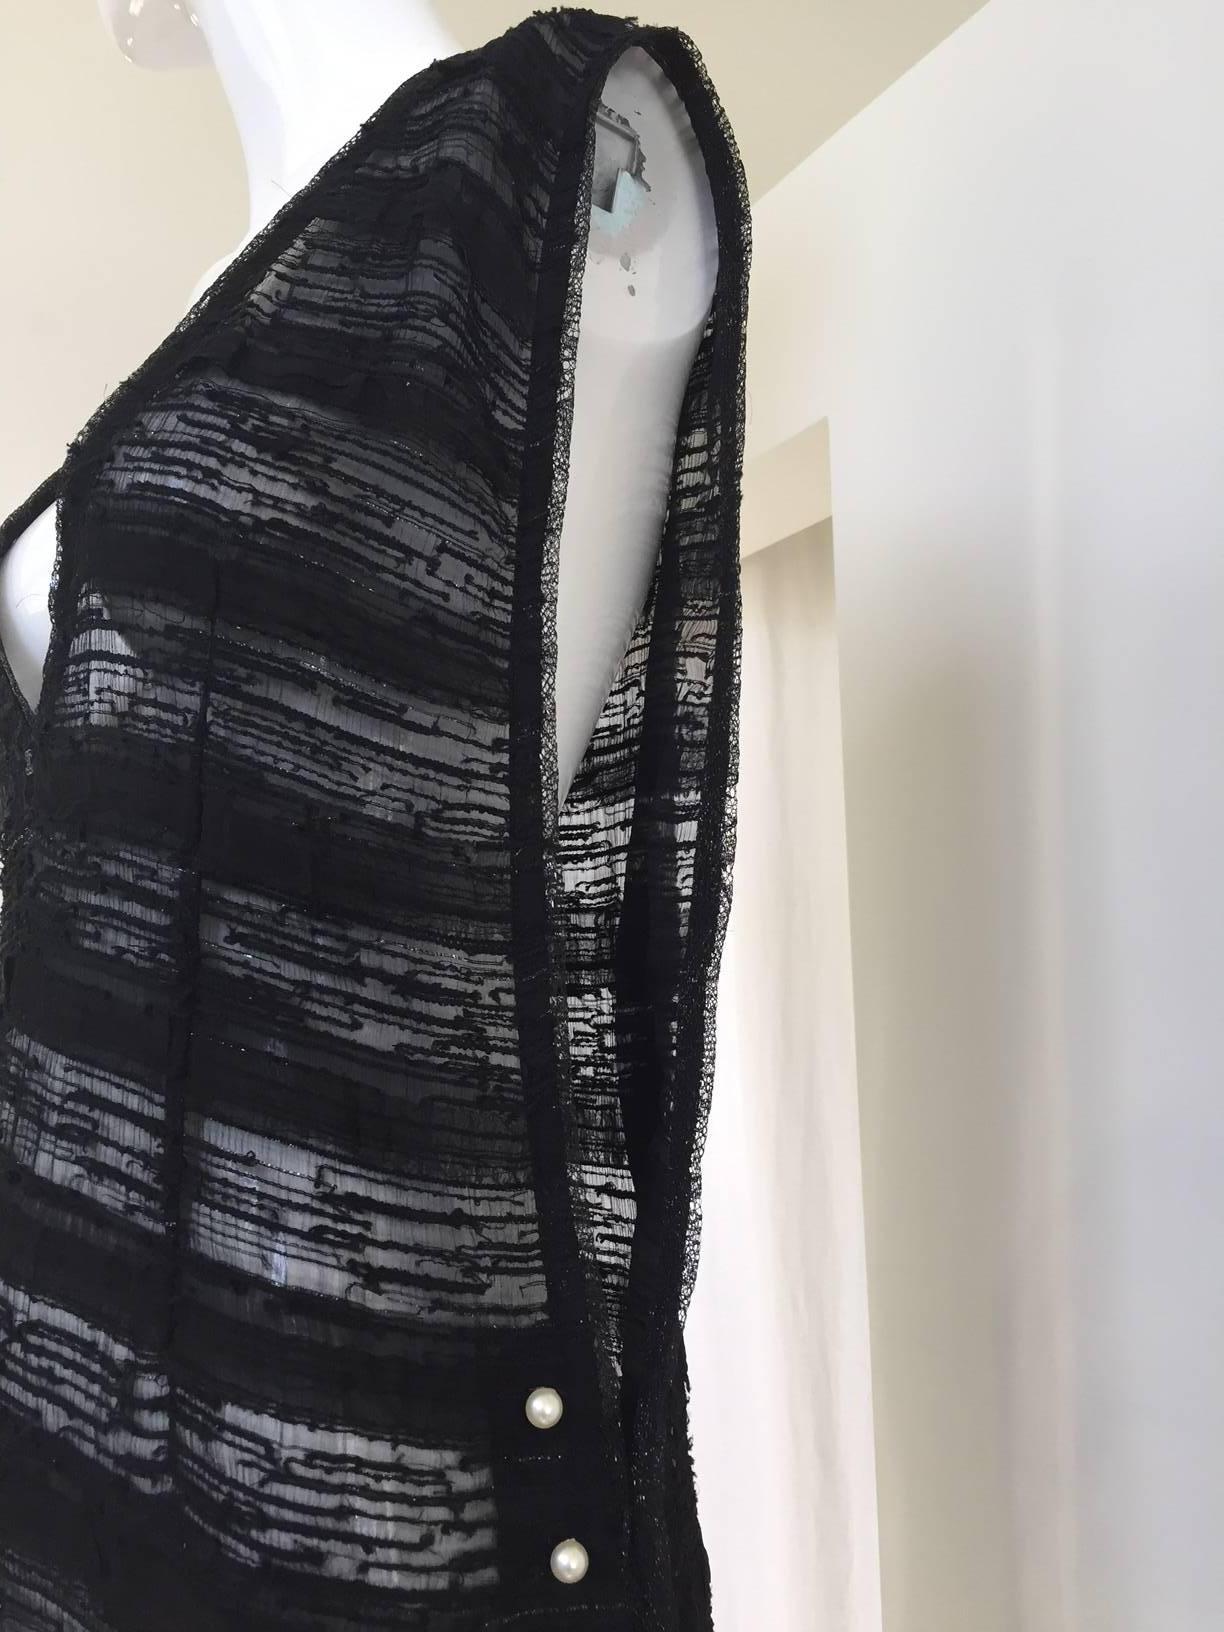 CHANEL black sheer silk tunic with pearls 1